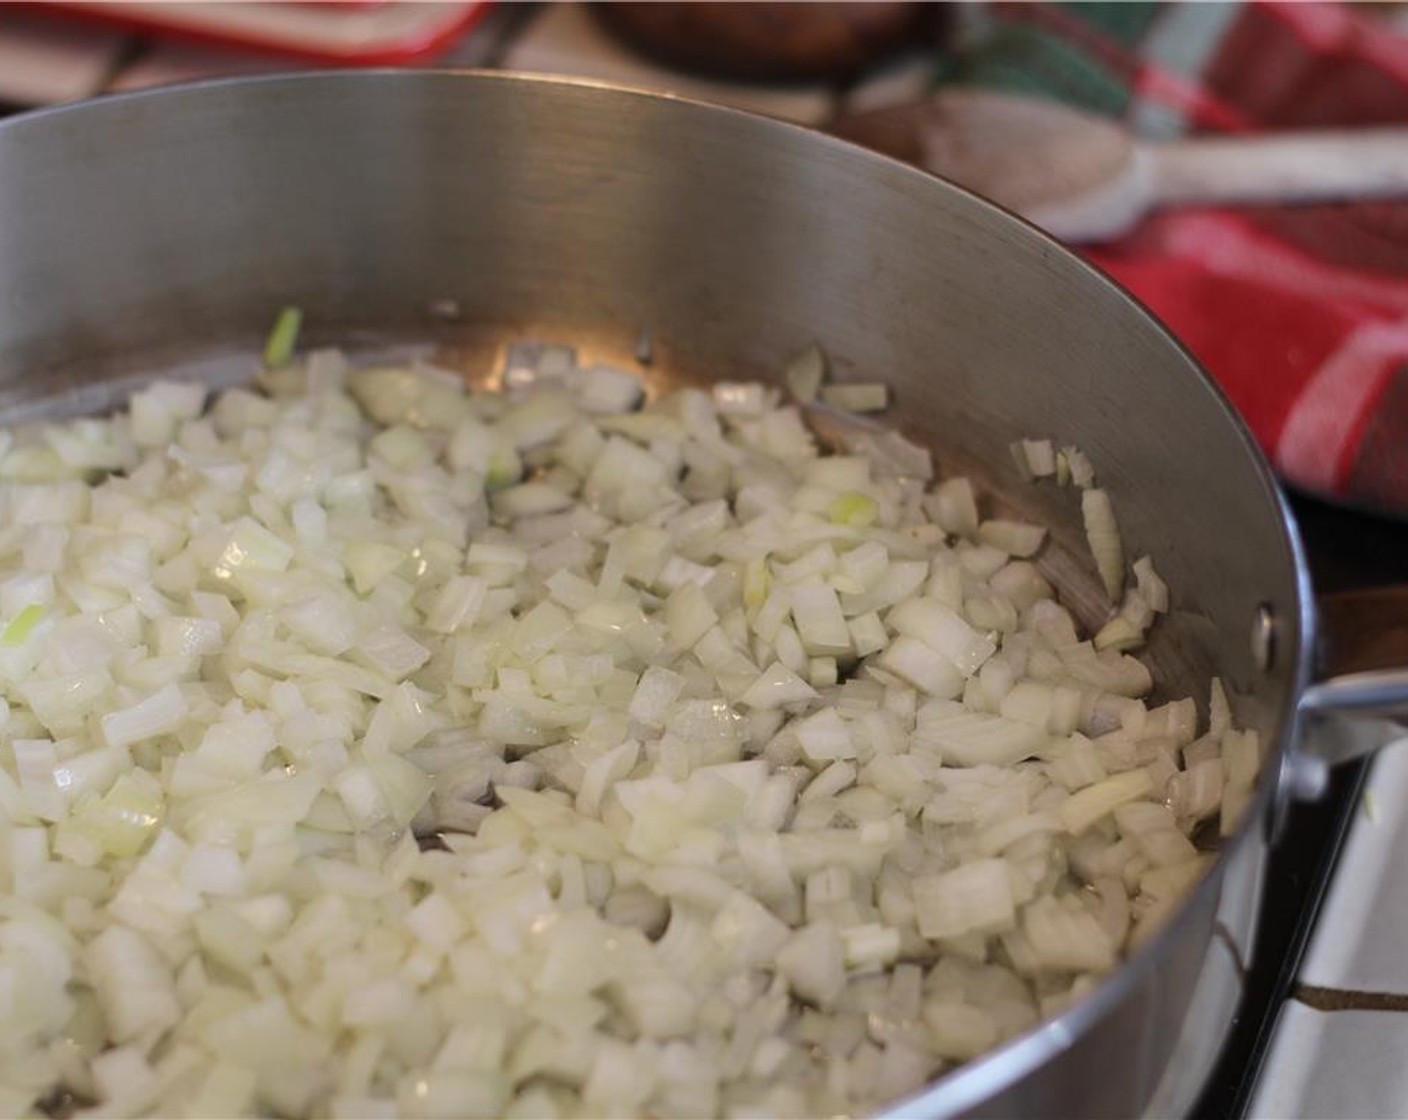 step 2 Add the diced onions to a pan with Grapeseed Oil (1 Tbsp). Sauté them for 45 minutes to an hour. Add water from time to time to make sure they do not burn. While the onions caramelize, move on to the mushrooms.